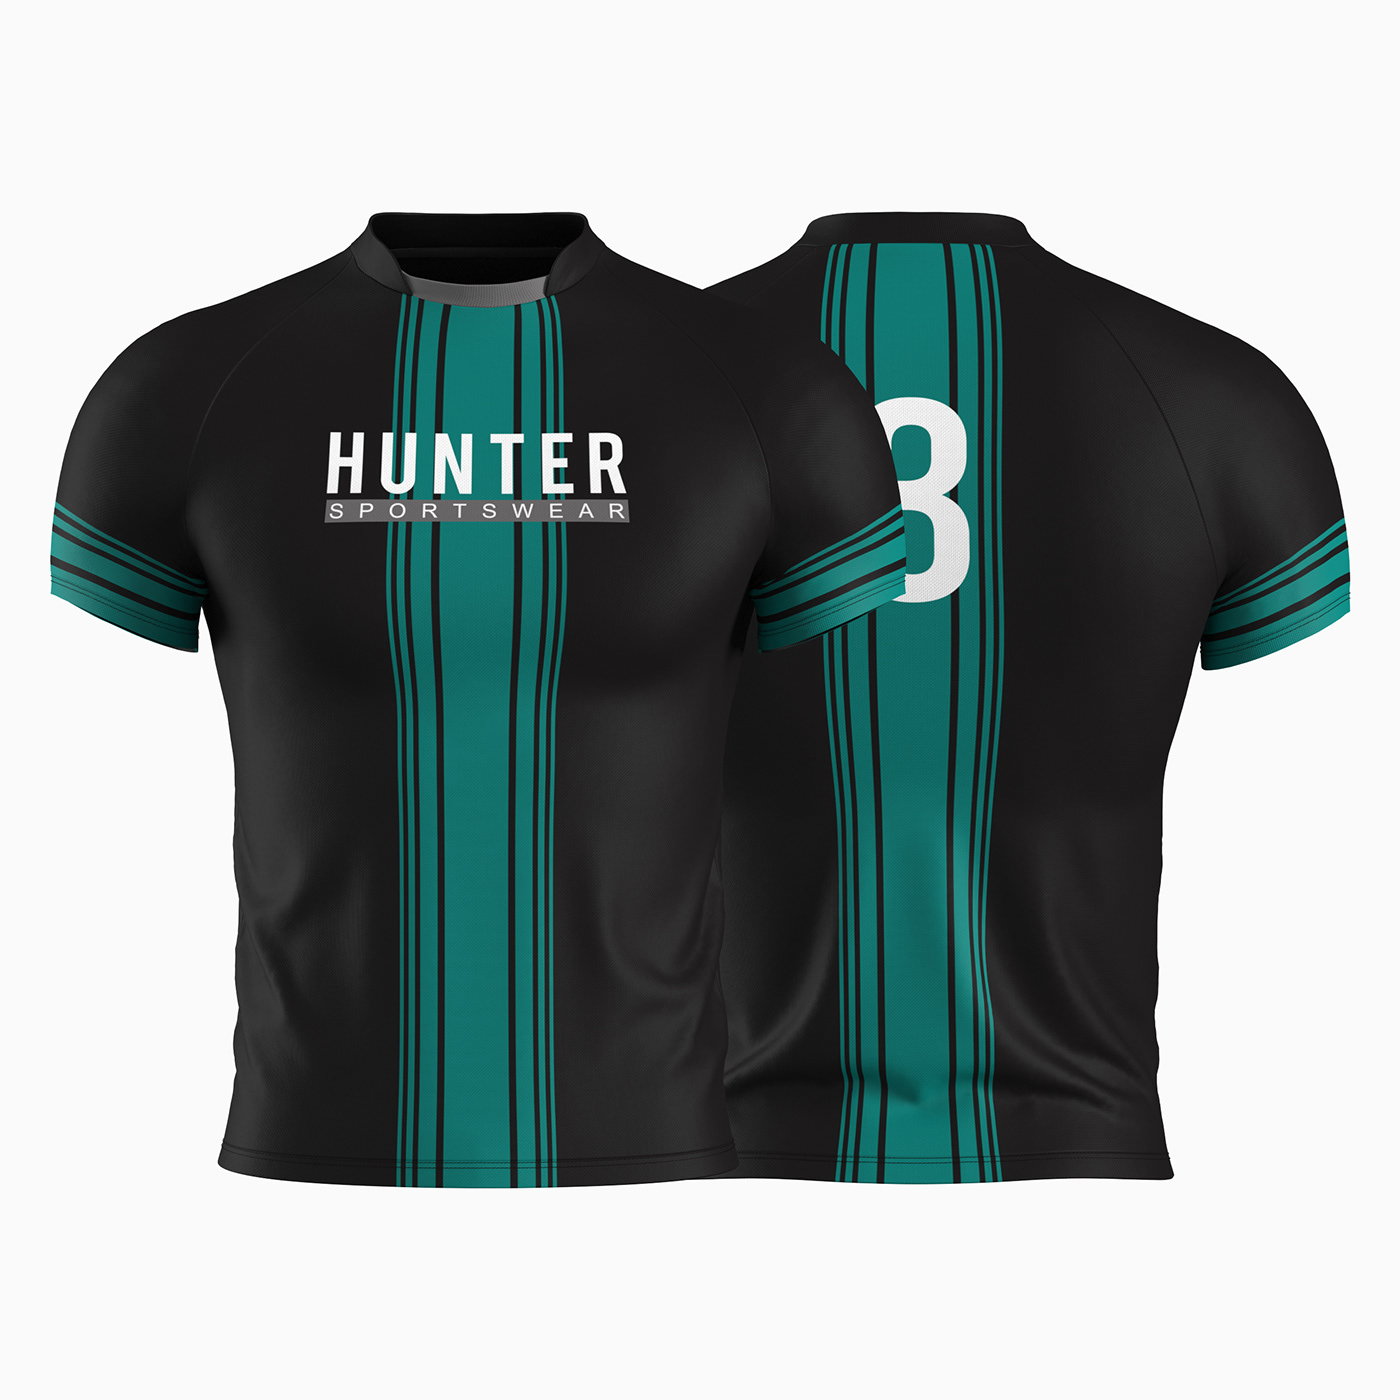 apparel Sportswear activewear t-shirt jersey Clothing Fashion  fashion design graphic design  Rugby